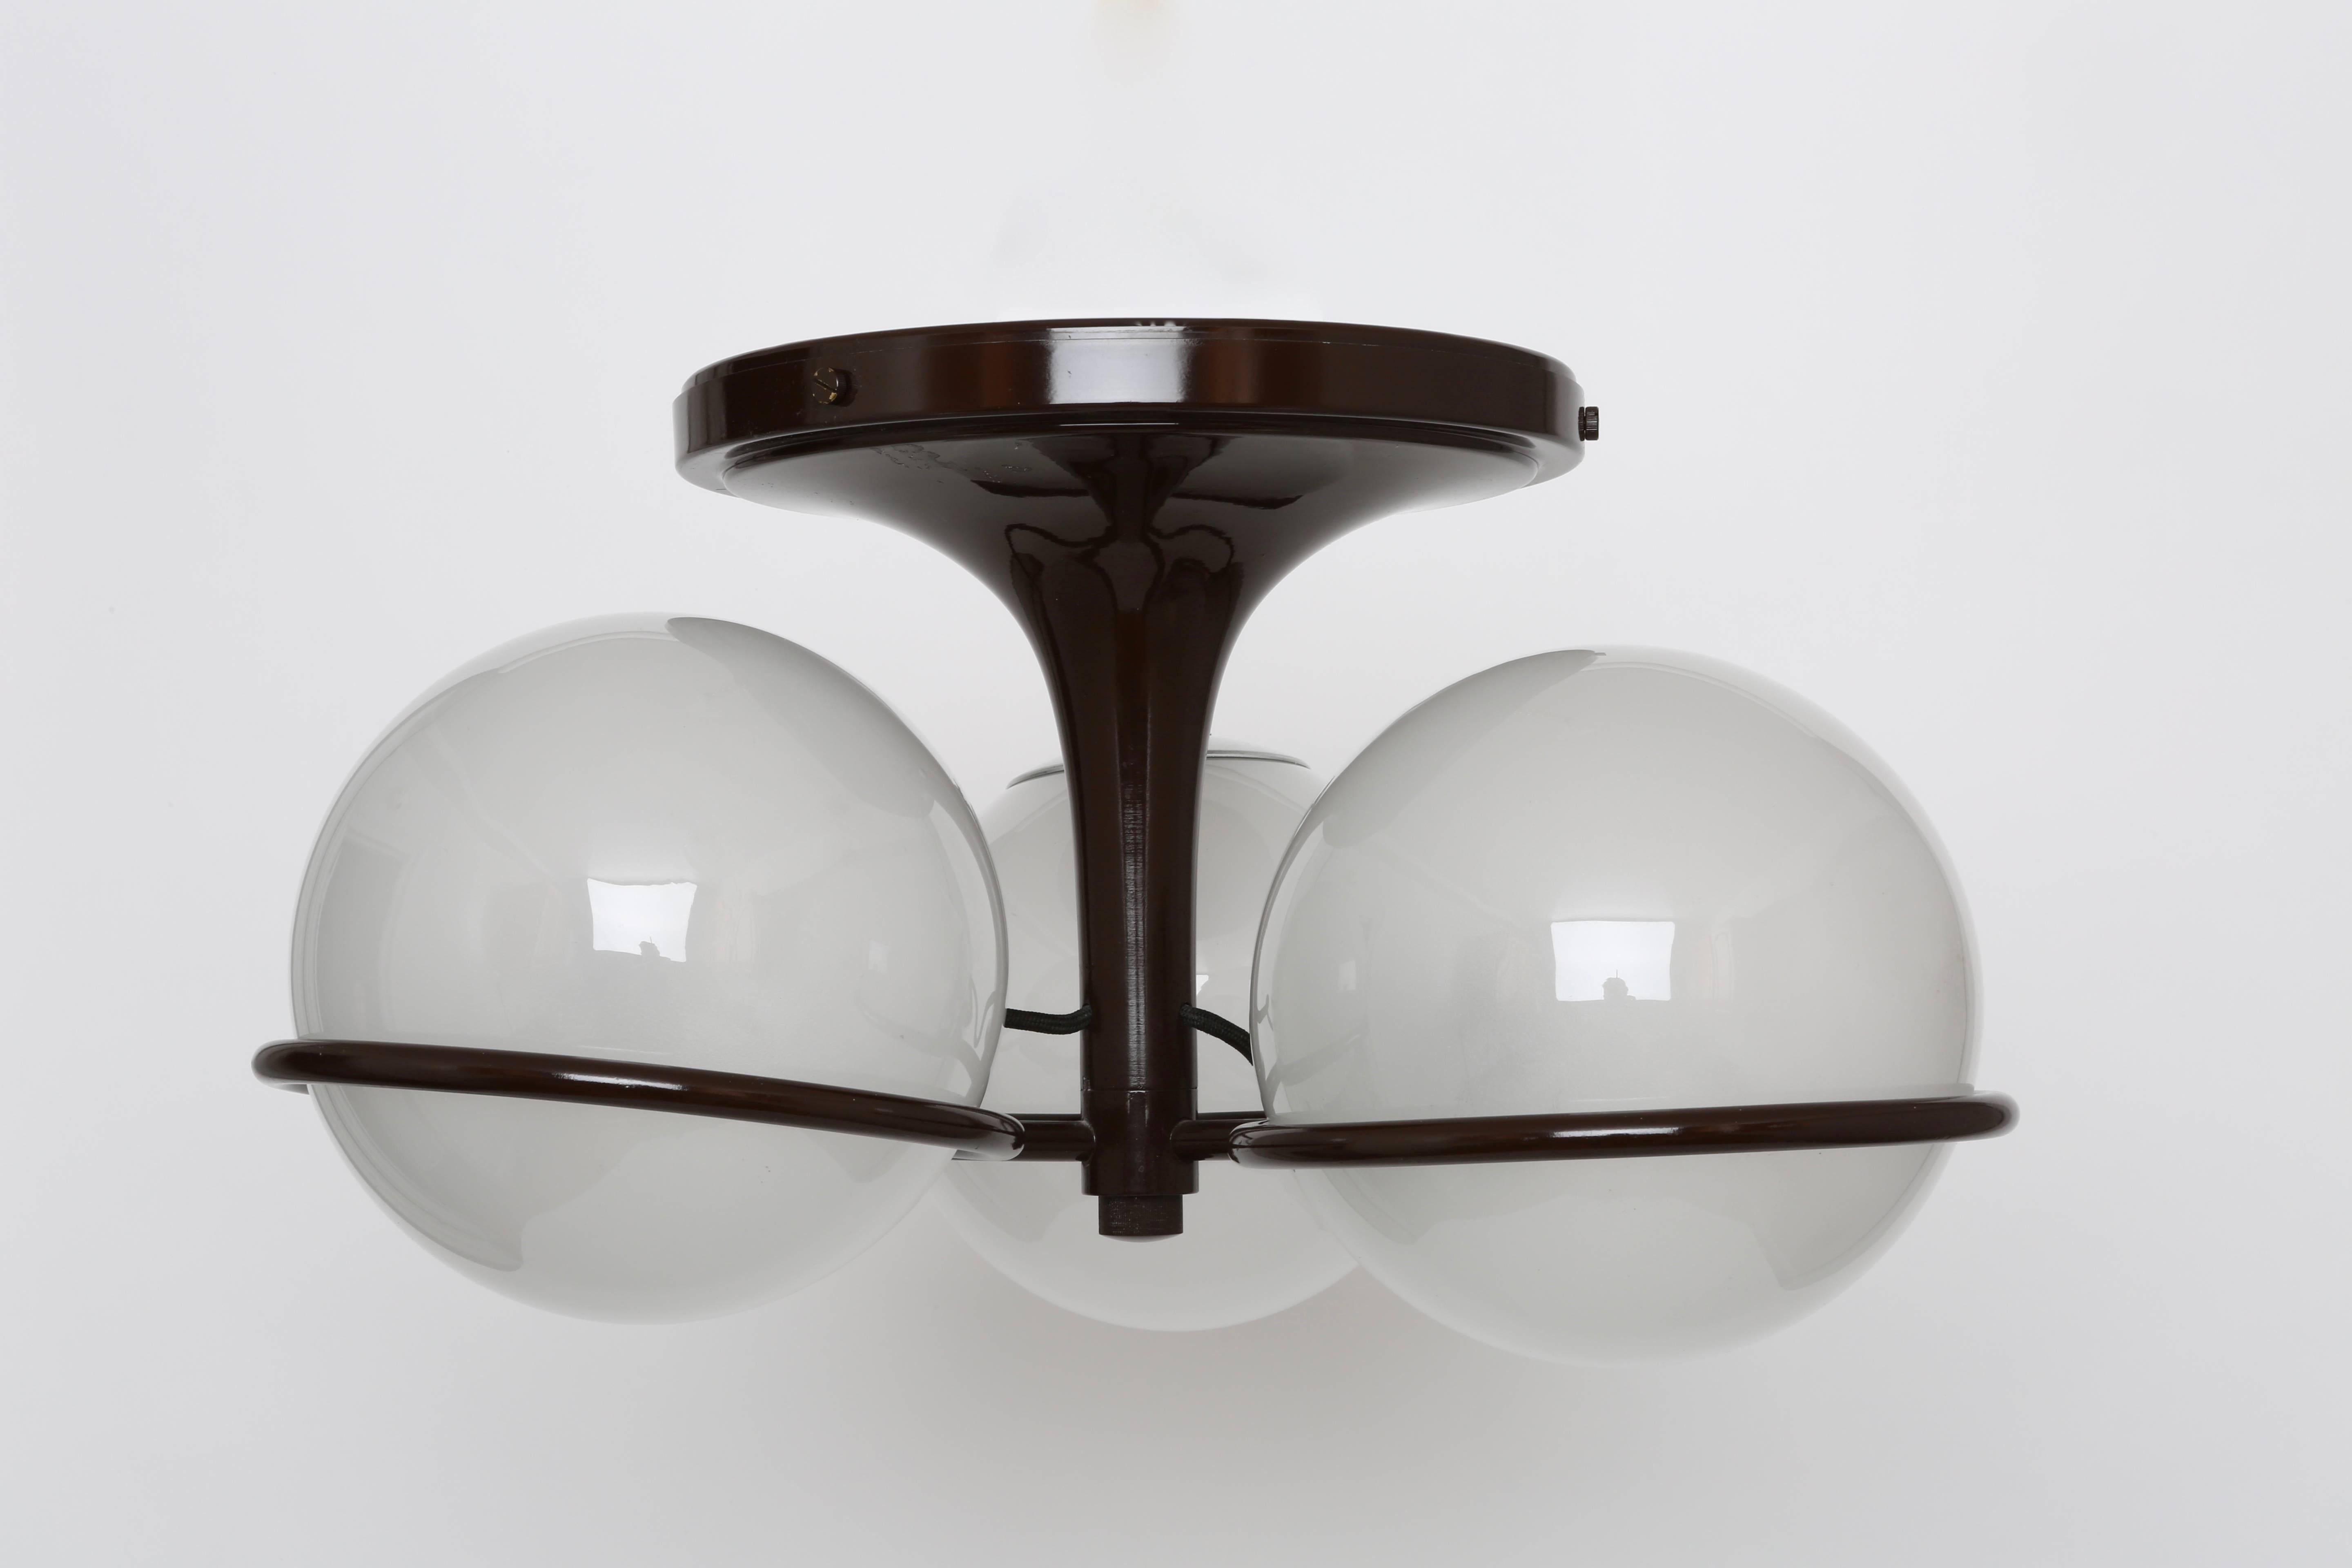 Gino Sarfatti lighting fixture for Arteluce.
Model 2042/3.
Frosted Murano glass globes and dark brown lacquered metal.
Italy, 1960s.
 